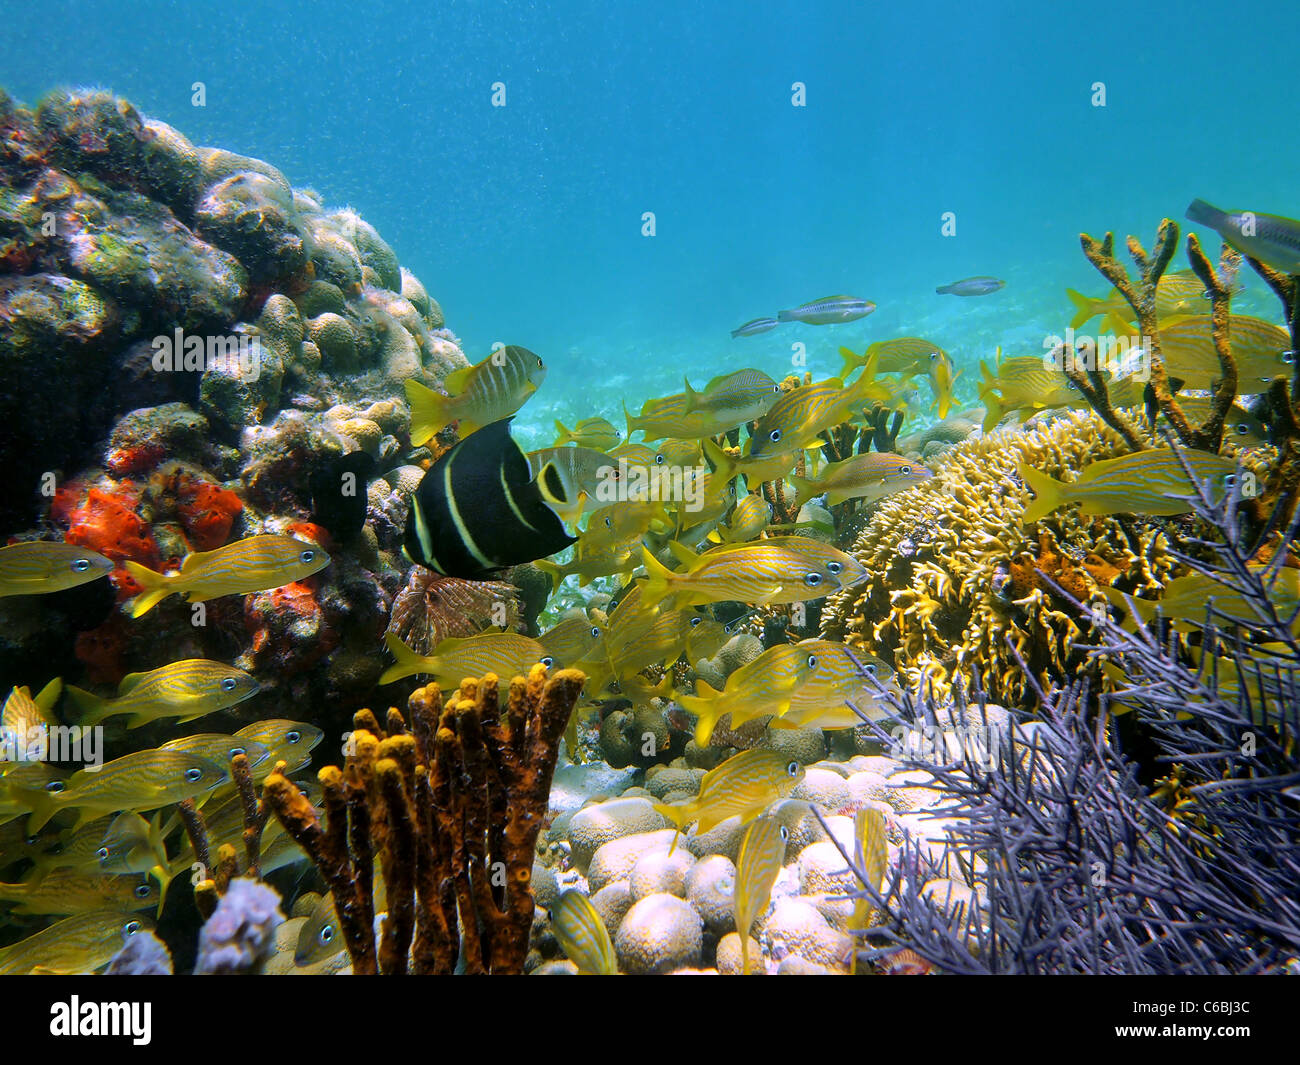 Colorful underwater coral reef with a shoal of tropical fish and sponges in the Caribbean sea, Bocas del Toro, Panama, Central America Stock Photo